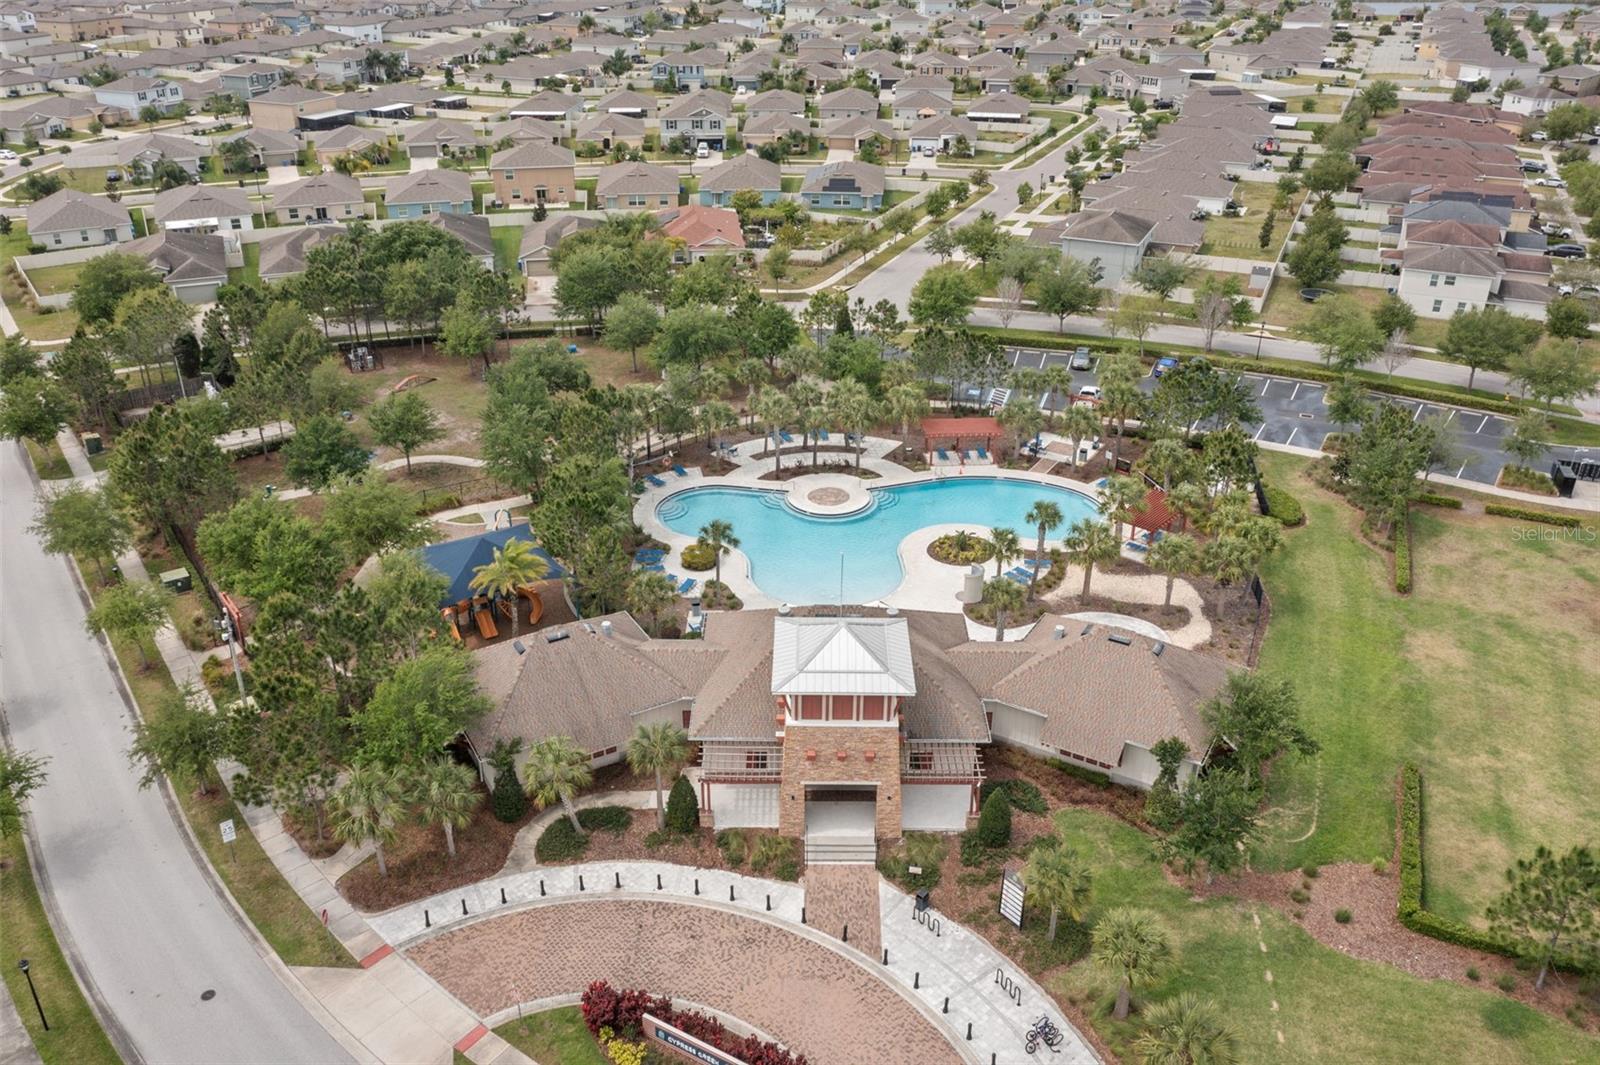 Aerial view of clubhouse & community pool